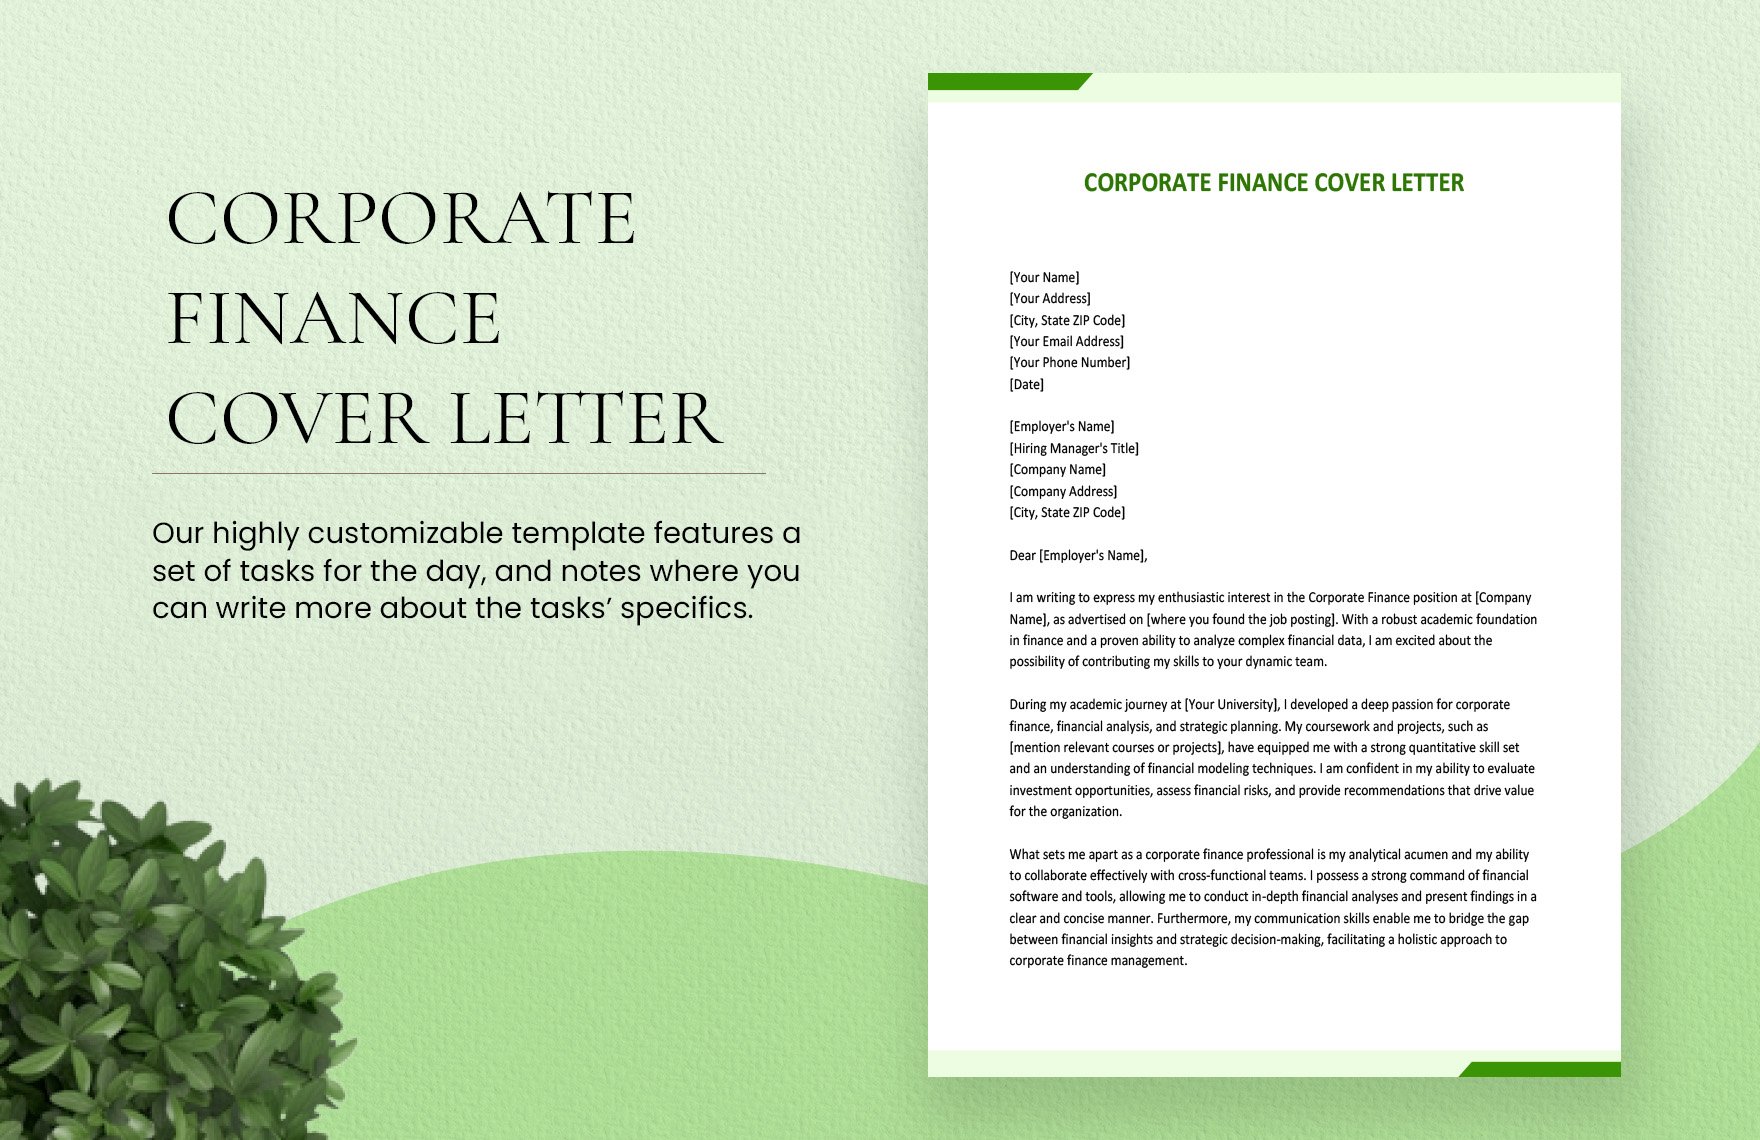 Corporate Finance Cover Letter